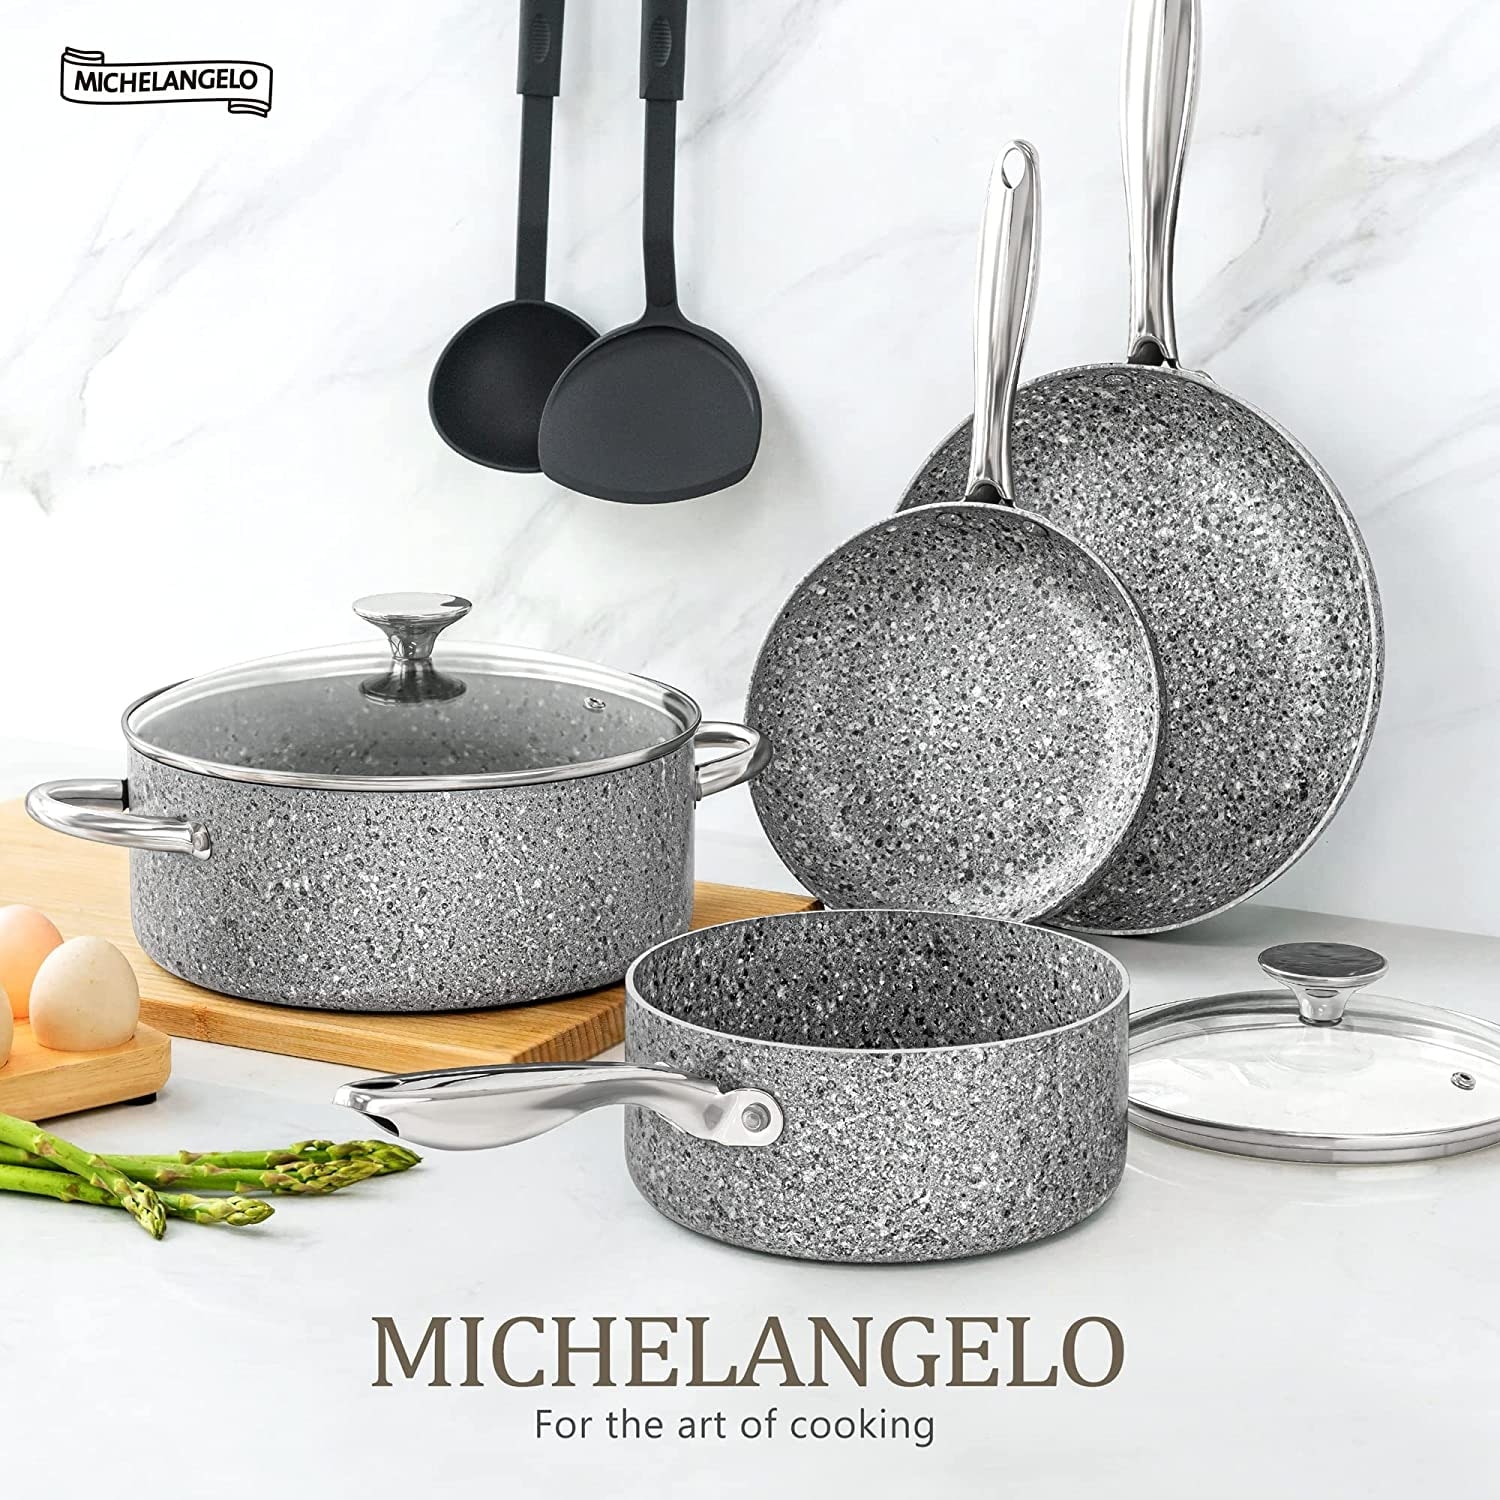 https://ak1.ostkcdn.com/images/products/is/images/direct/2a800f1e11bfb518d2886a6e0bdbf98f54d47d02/Pots-and-Pans-Set-22-Piece%2C-Nonstick-Kitchen-Cookware-Sets-with-Stone-Derived-Coating.jpg